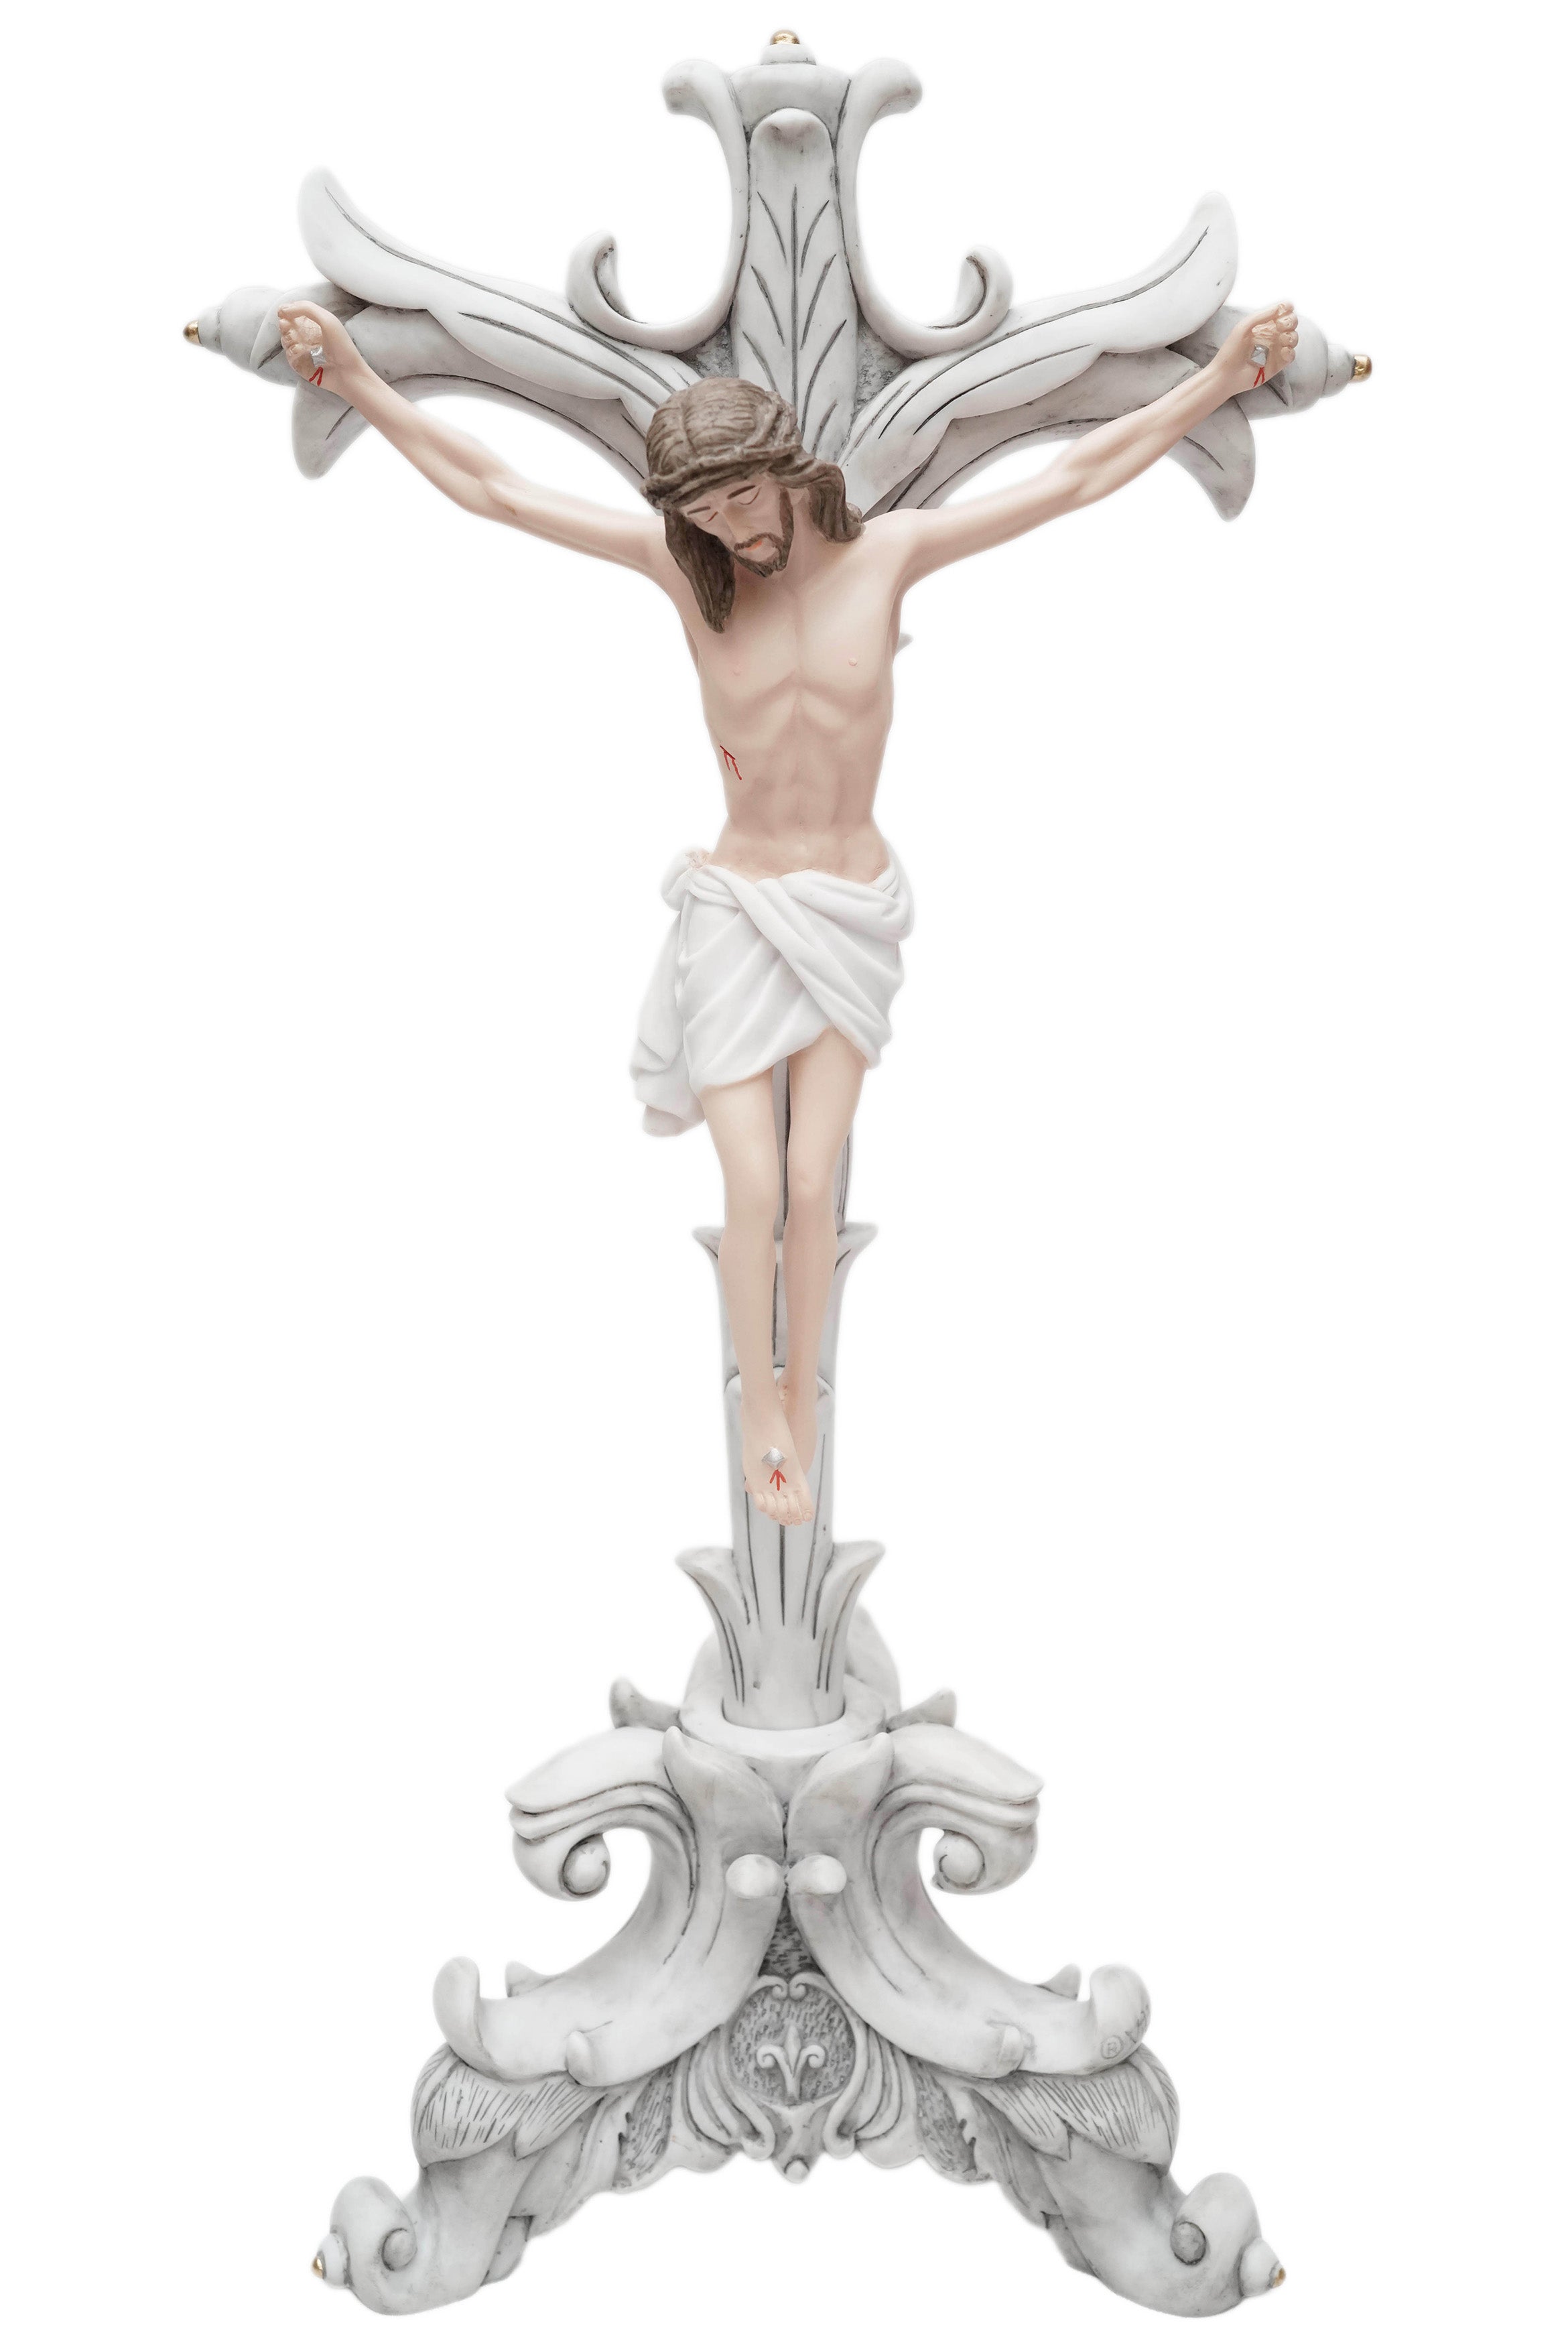 A Cross And A Crucifix: Is One A Better Symbol Than The Other? – Diocesan